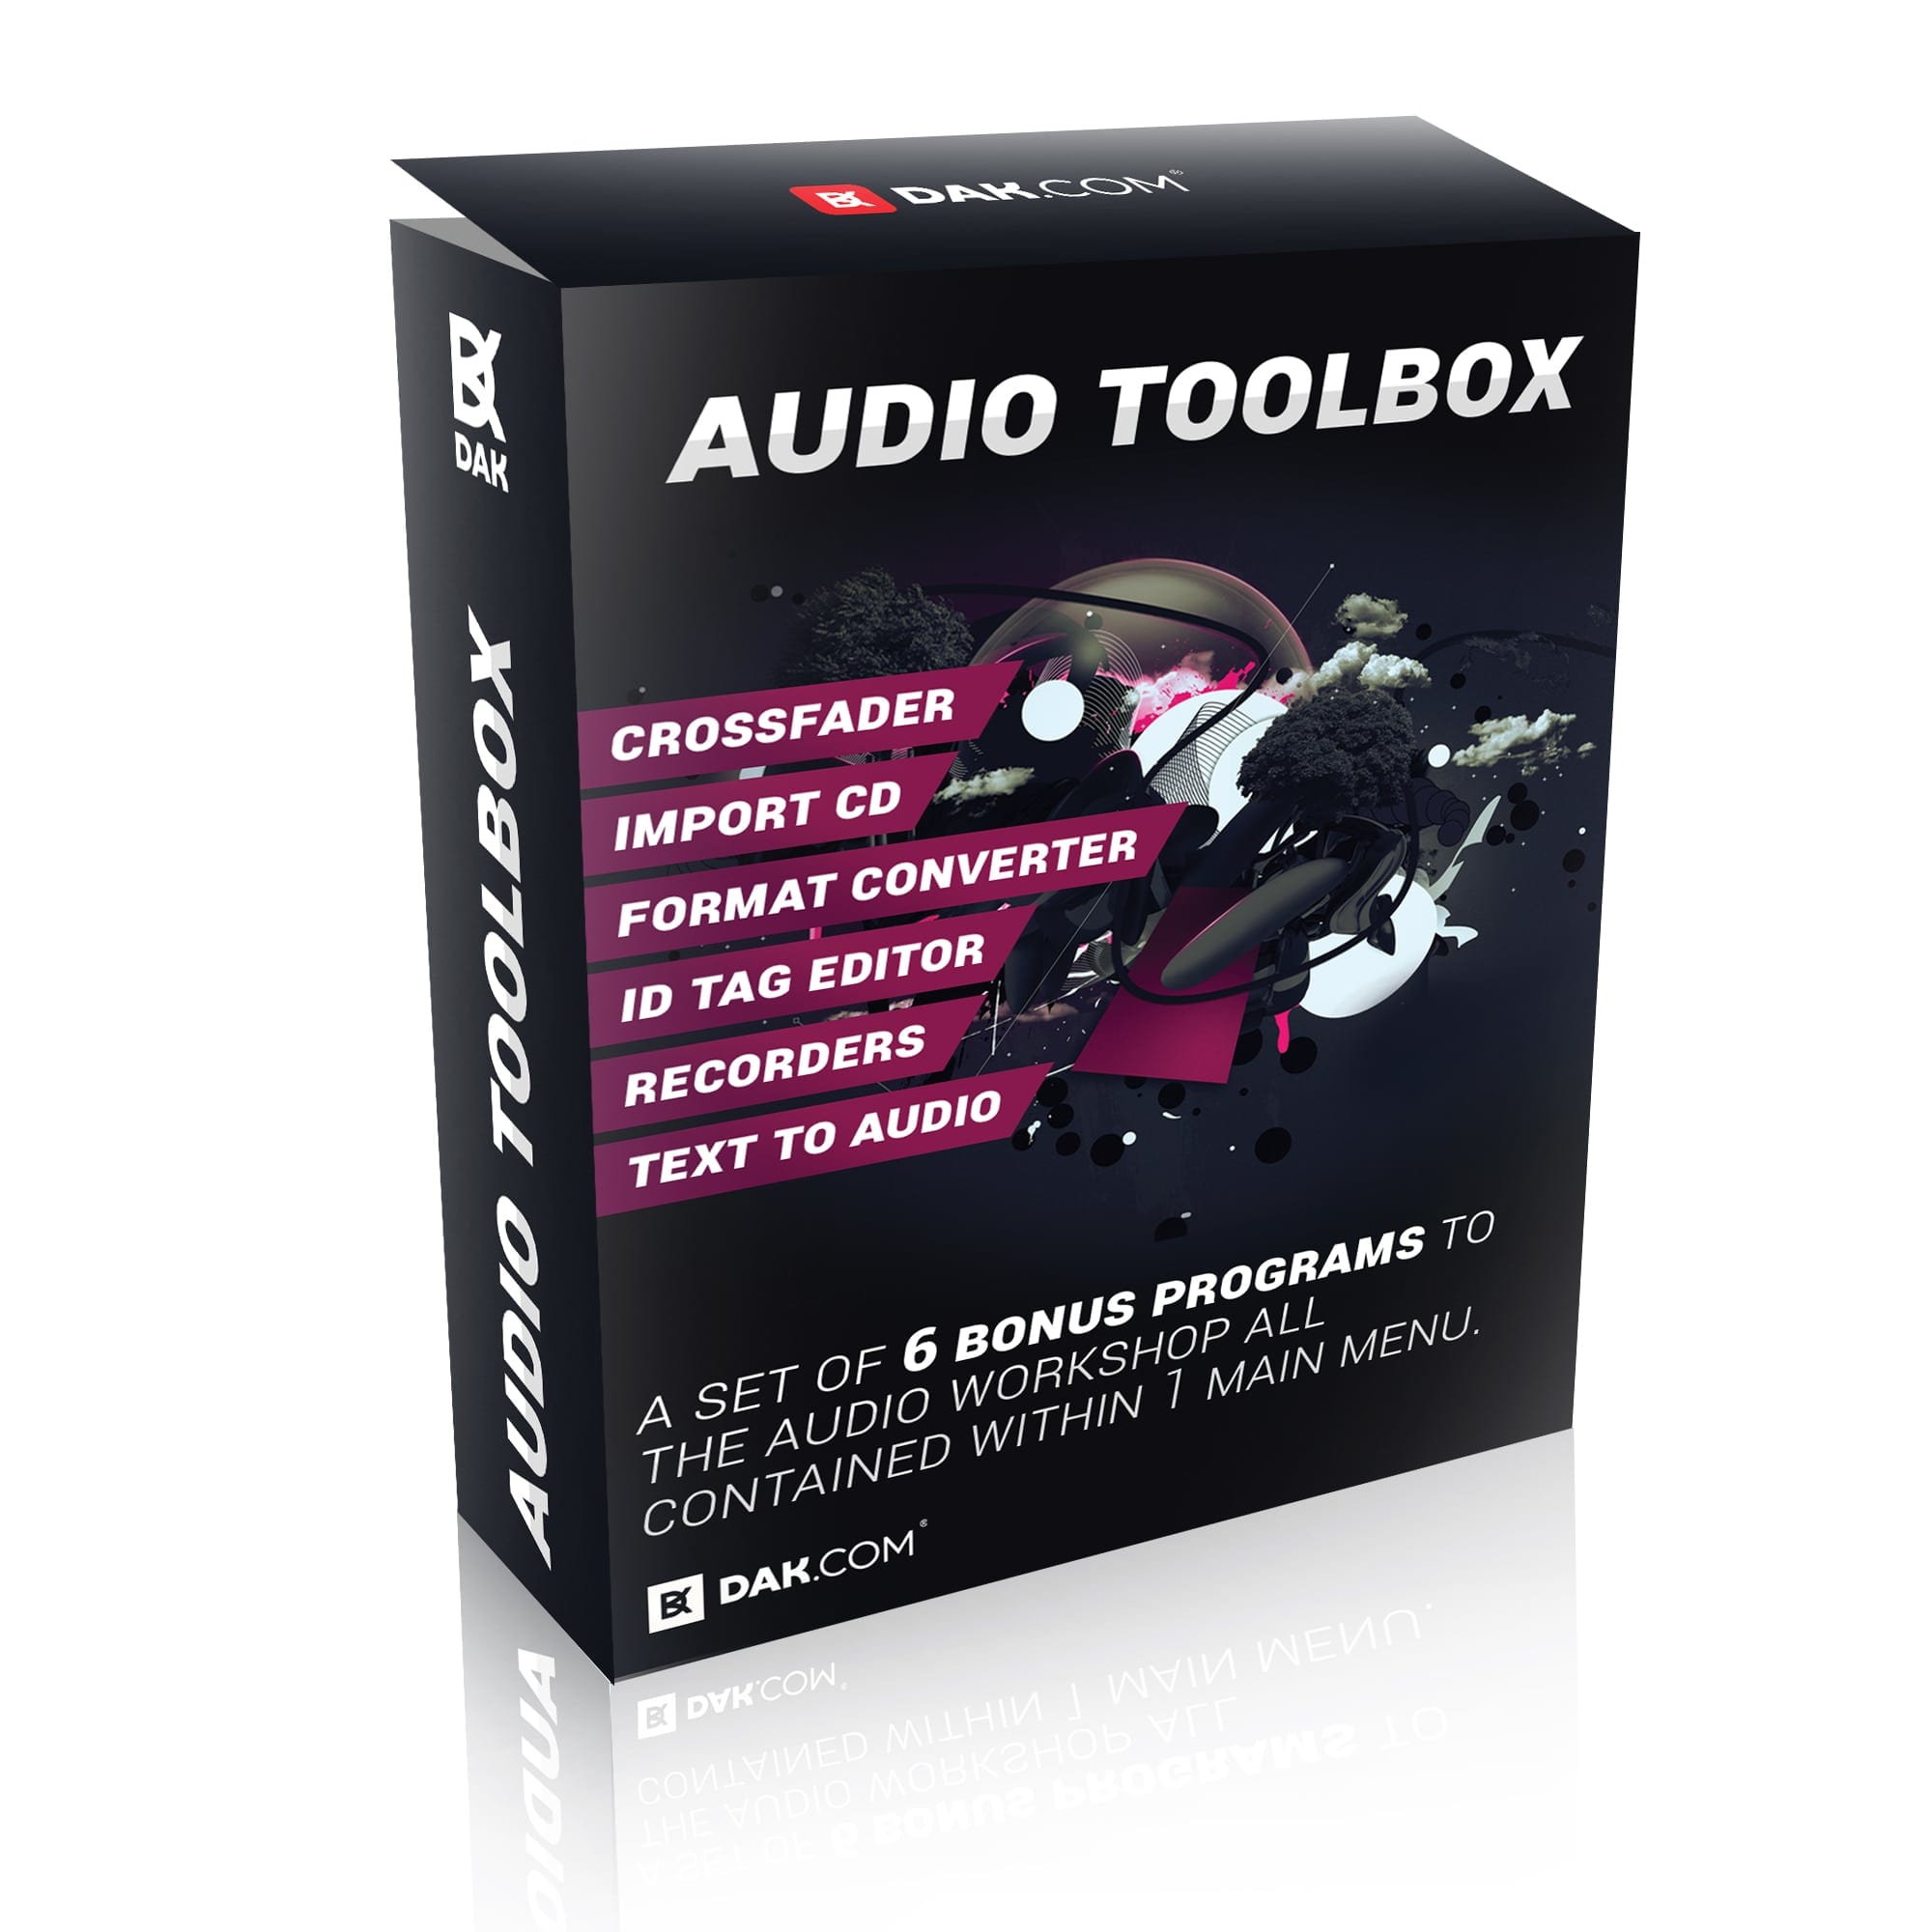 GiliSoft Audio Toolbox Suite 10.4 instal the last version for ios